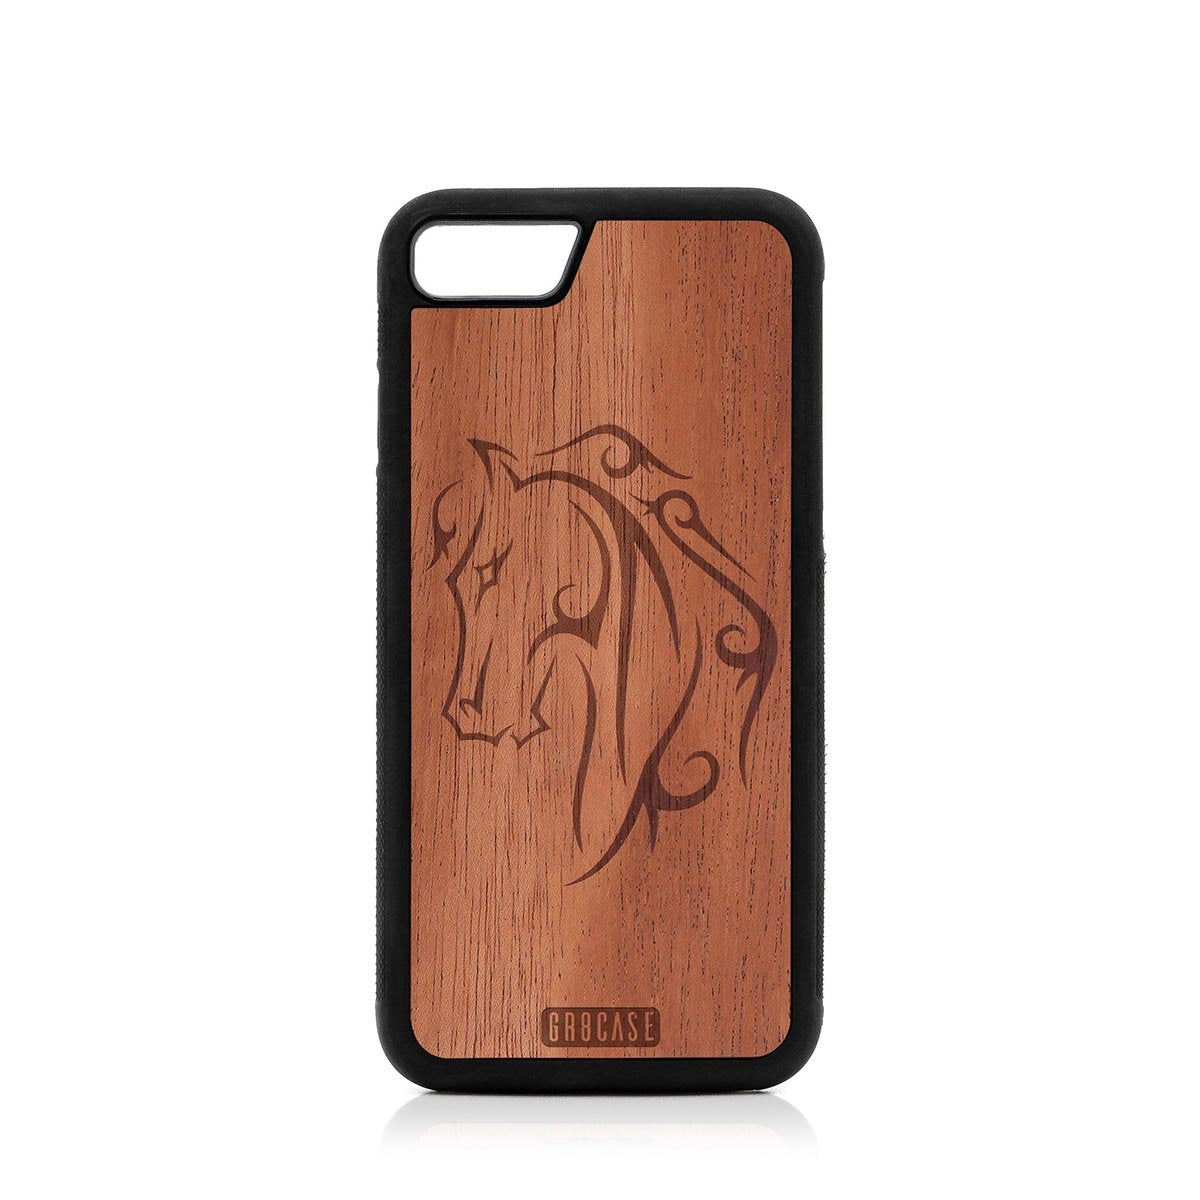 Horse Tattoo Design Wood Case For iPhone SE 2020 by GR8CASE